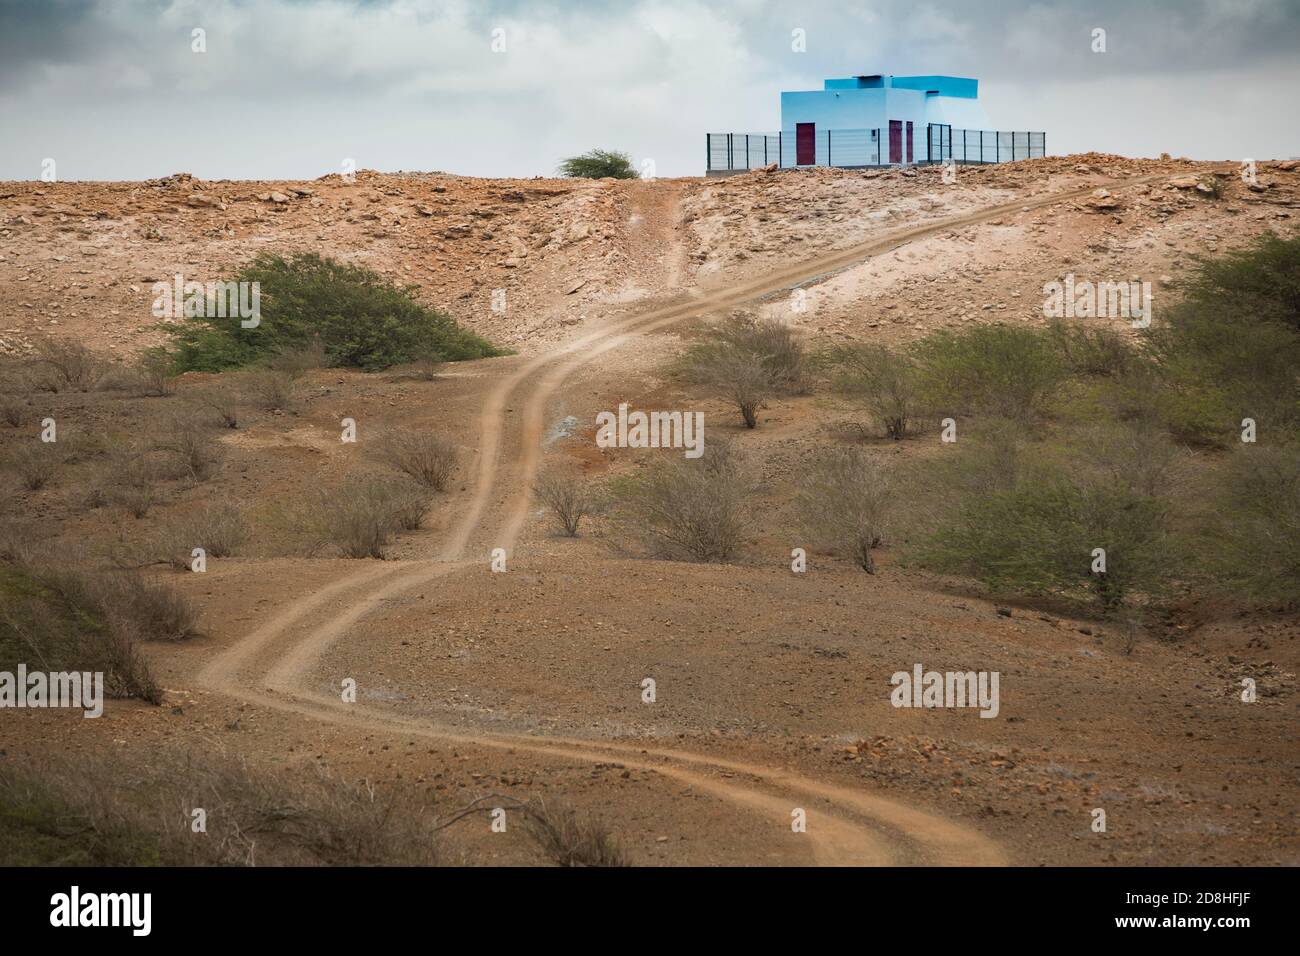 A bright blue painted water reservoir and pumping station can be seen atop a dry and barren hill on the island of Maio in Cape Verde. Stock Photo